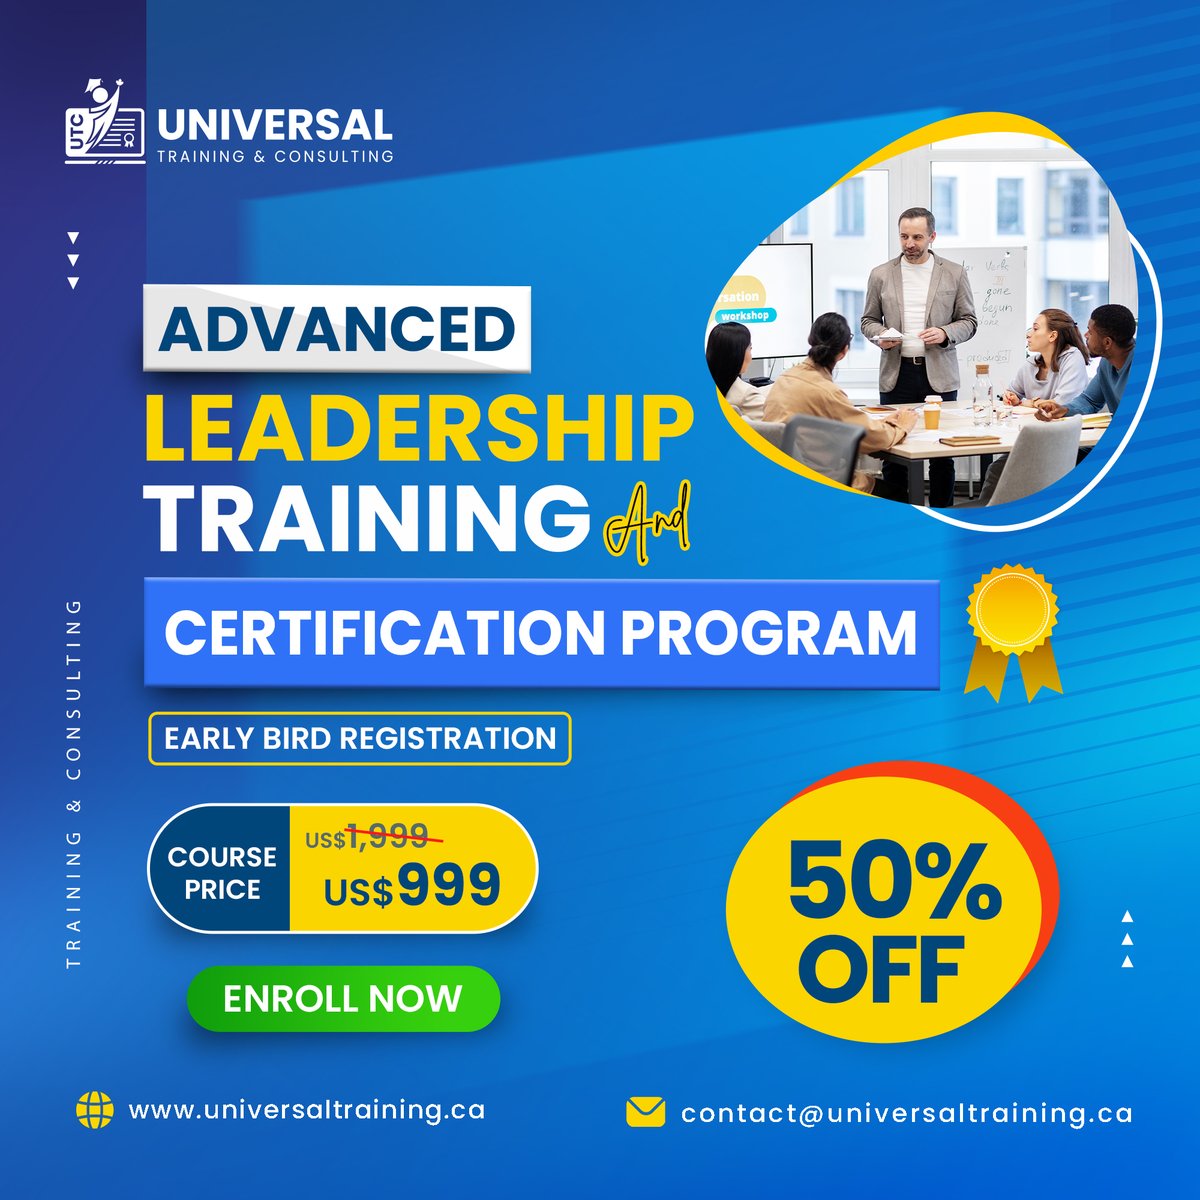 🚀Elevate Your Leadership: flat 50% Off Advanced Training & Certification! course fees are only US$999! 🌟Master Communication, Decision-Making & Impact! Visit More: universaltraining.ca #AdvancedLeadership #Training #Canada #BC #Victoria #Surrey #Certification #vancouver